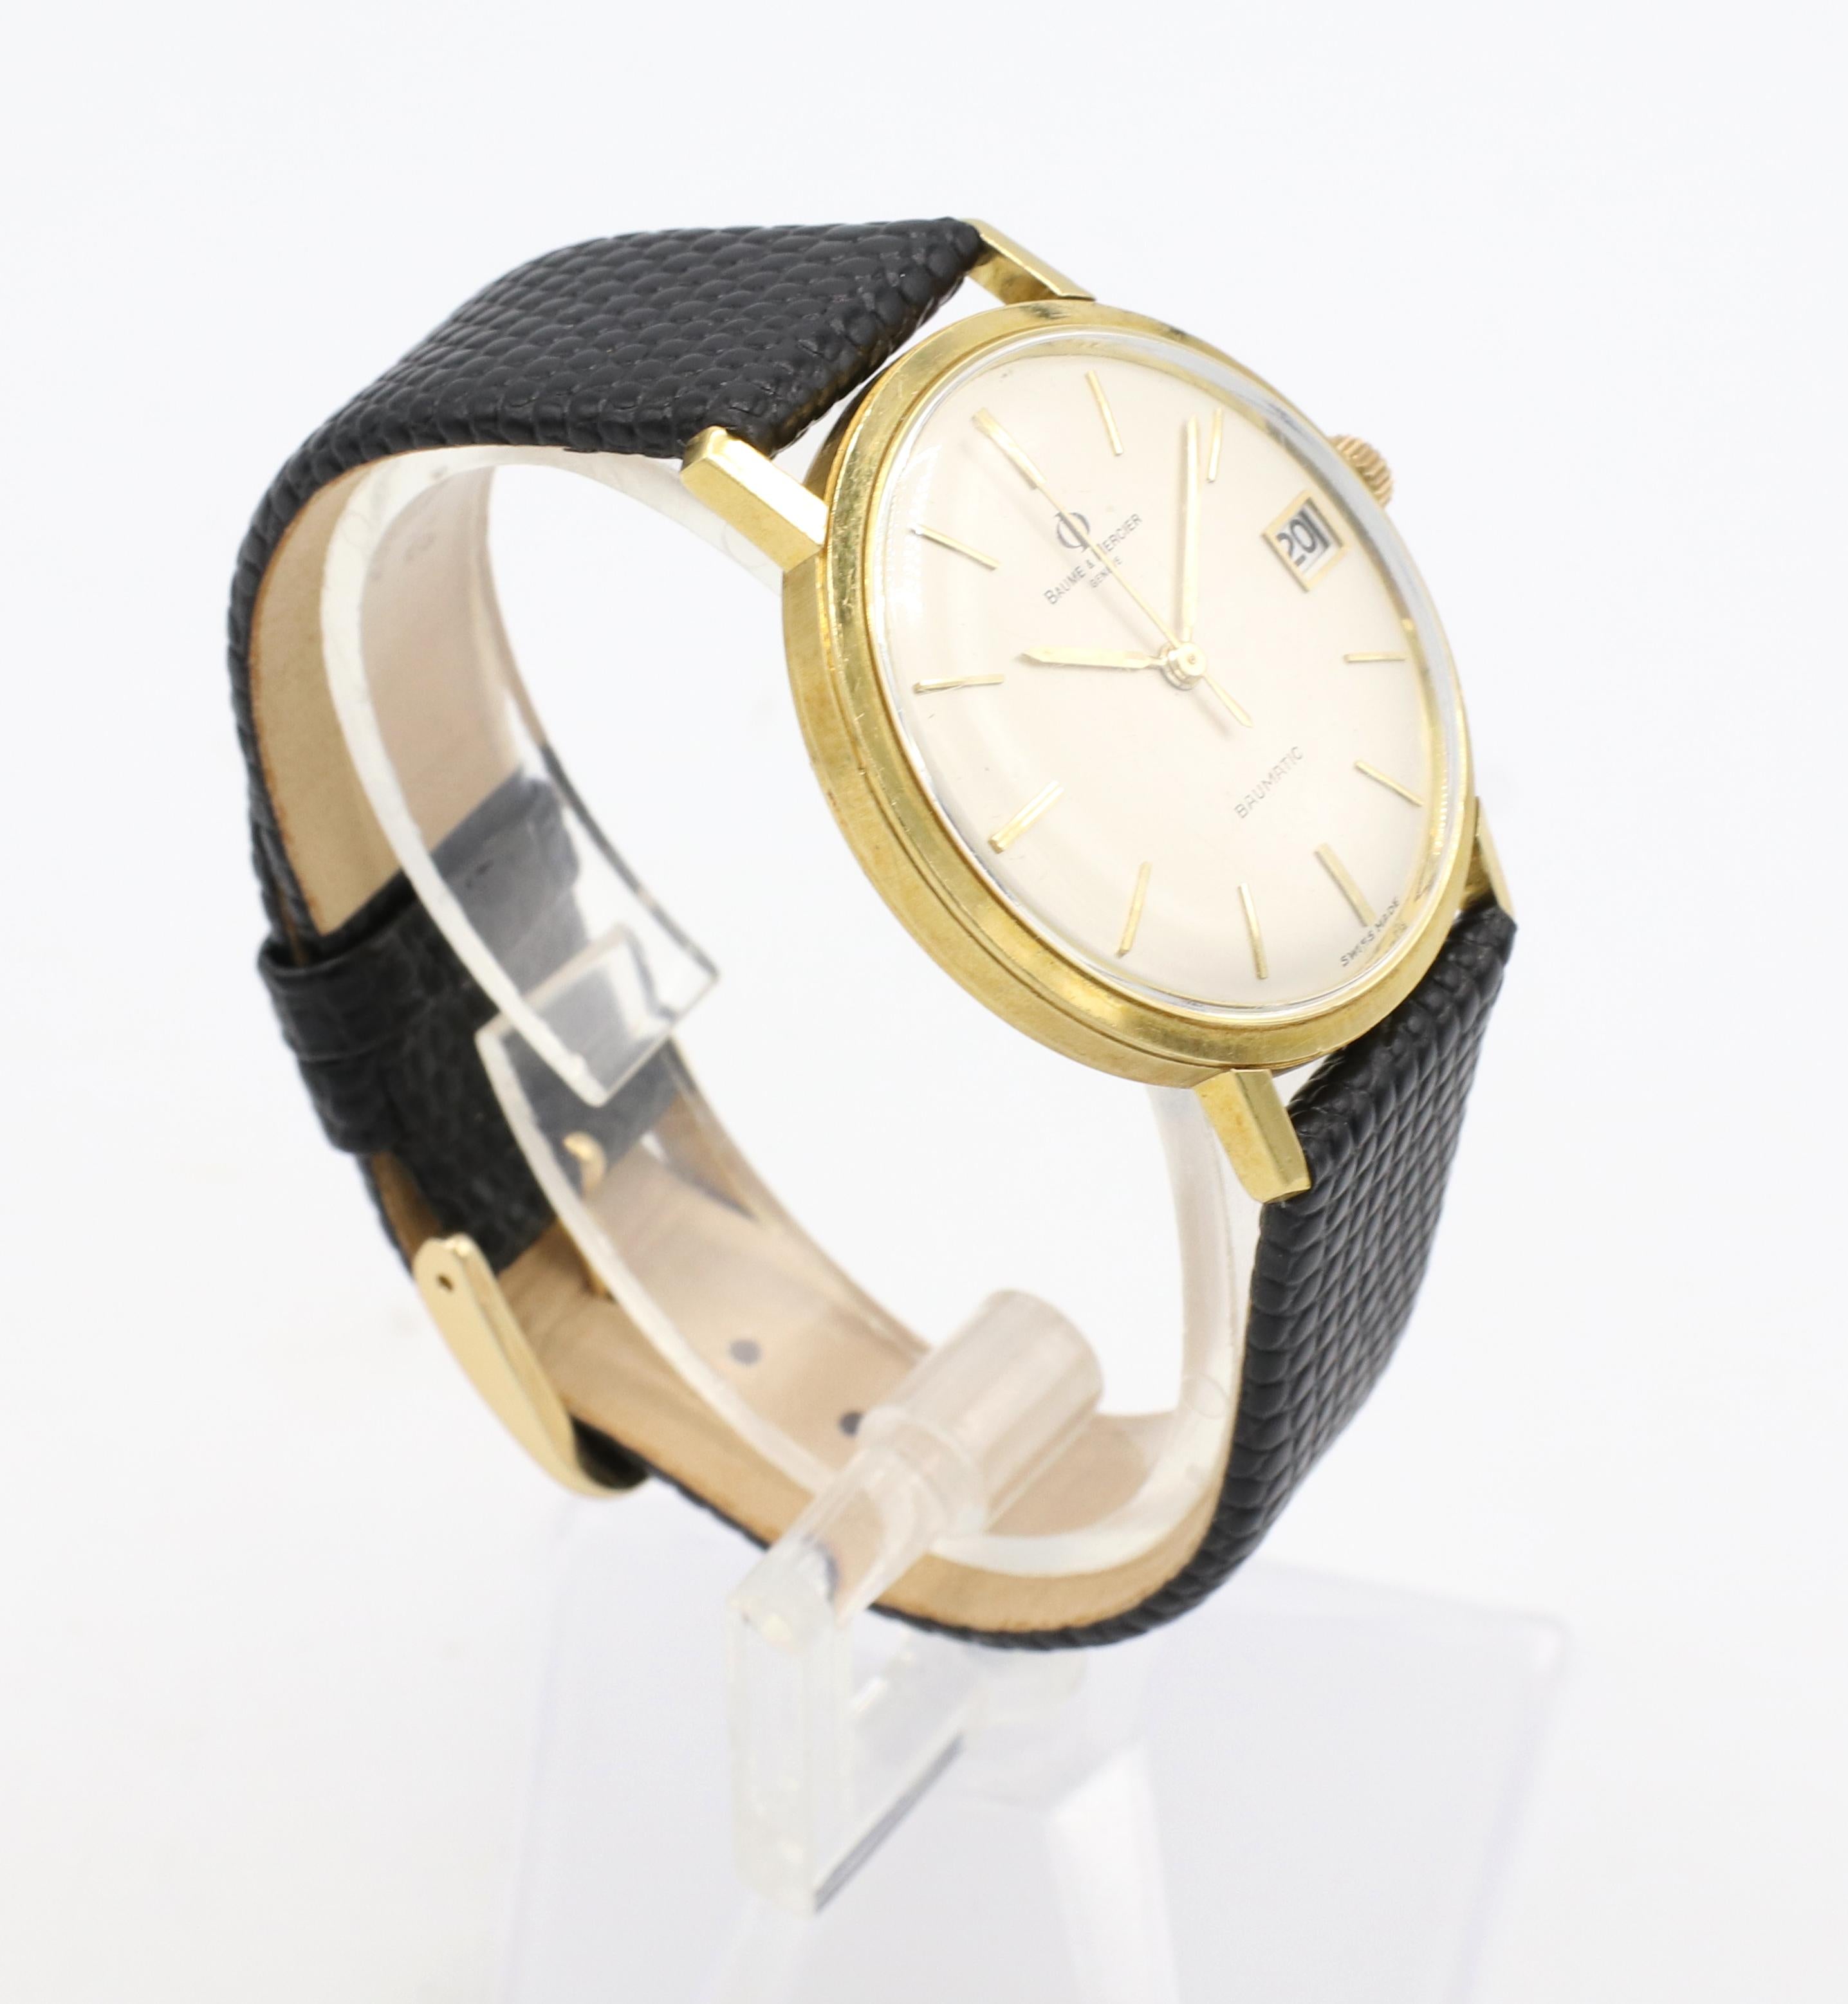 Vintage Baume & Mercier Baumatic  18 Karat Yellow Gold Leather Strap Wrist Watch
Metal: 18k yellow gold
Case size: 34mm
Reference: 3188 
Movement: Automatic
Dial: Silver
Strap/Buckle: New 